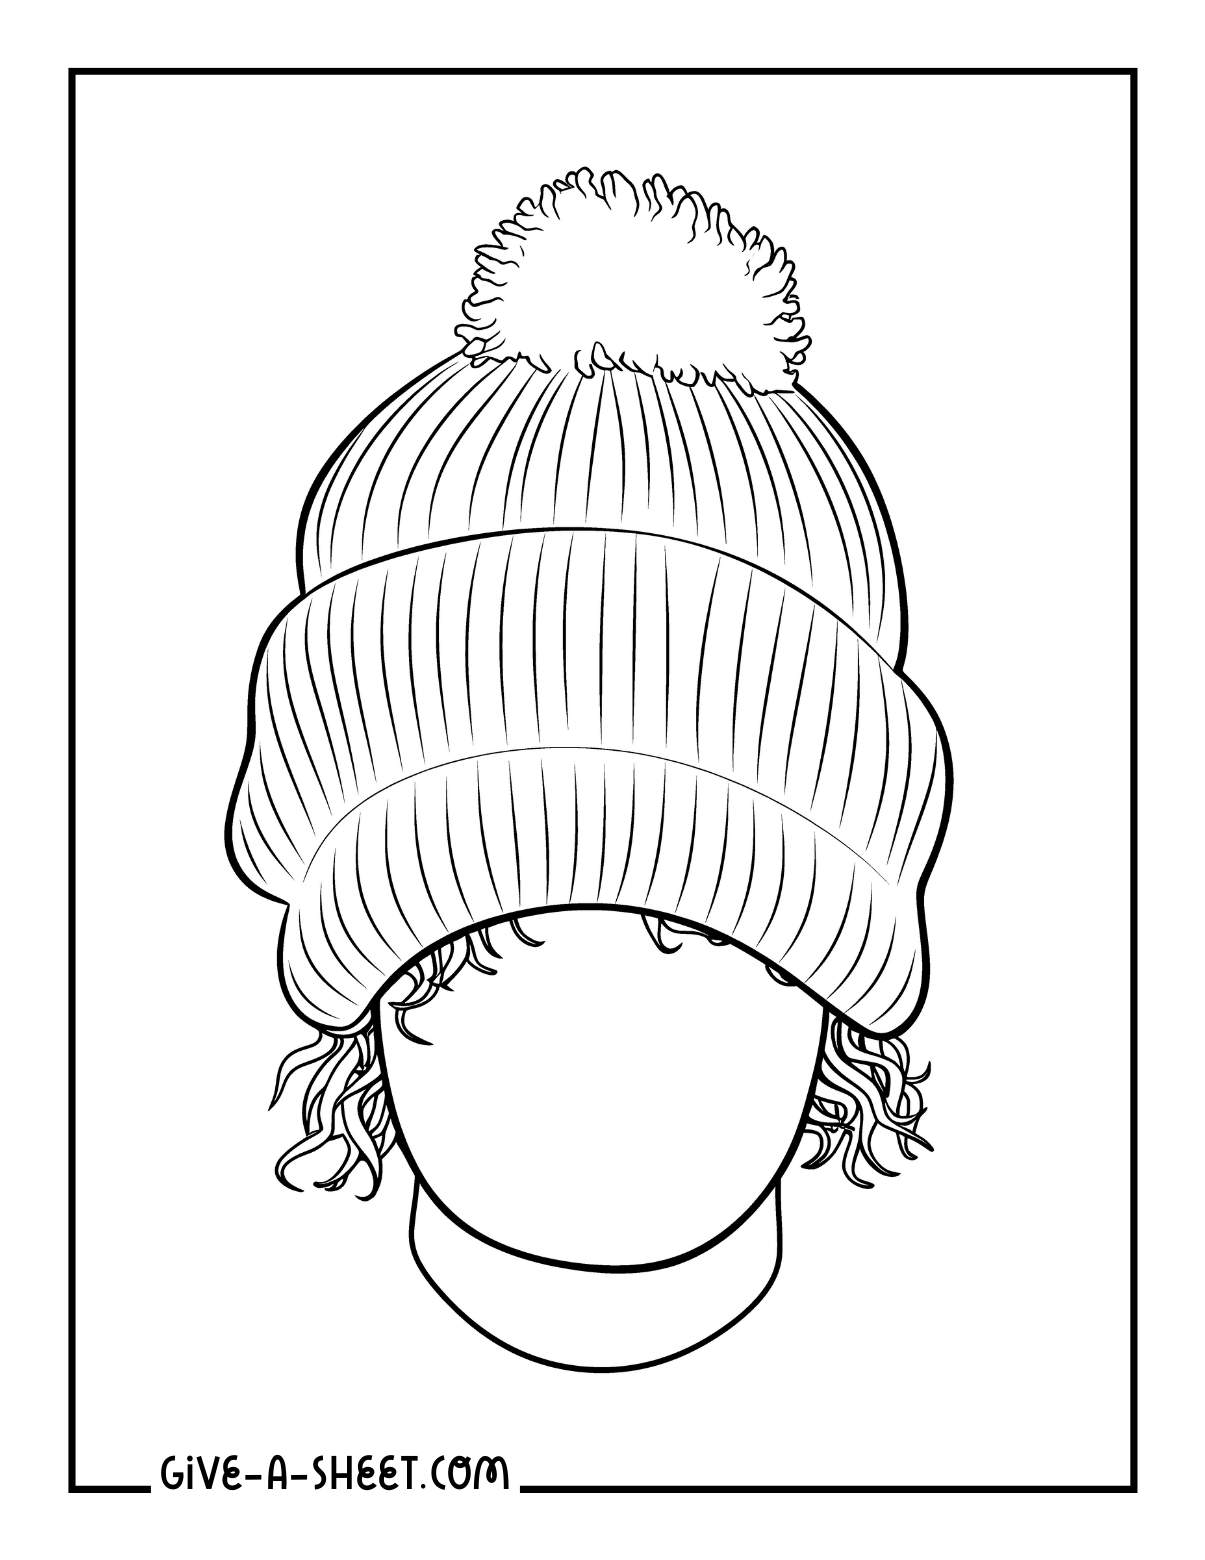 Slouchy winter toque coloring page.